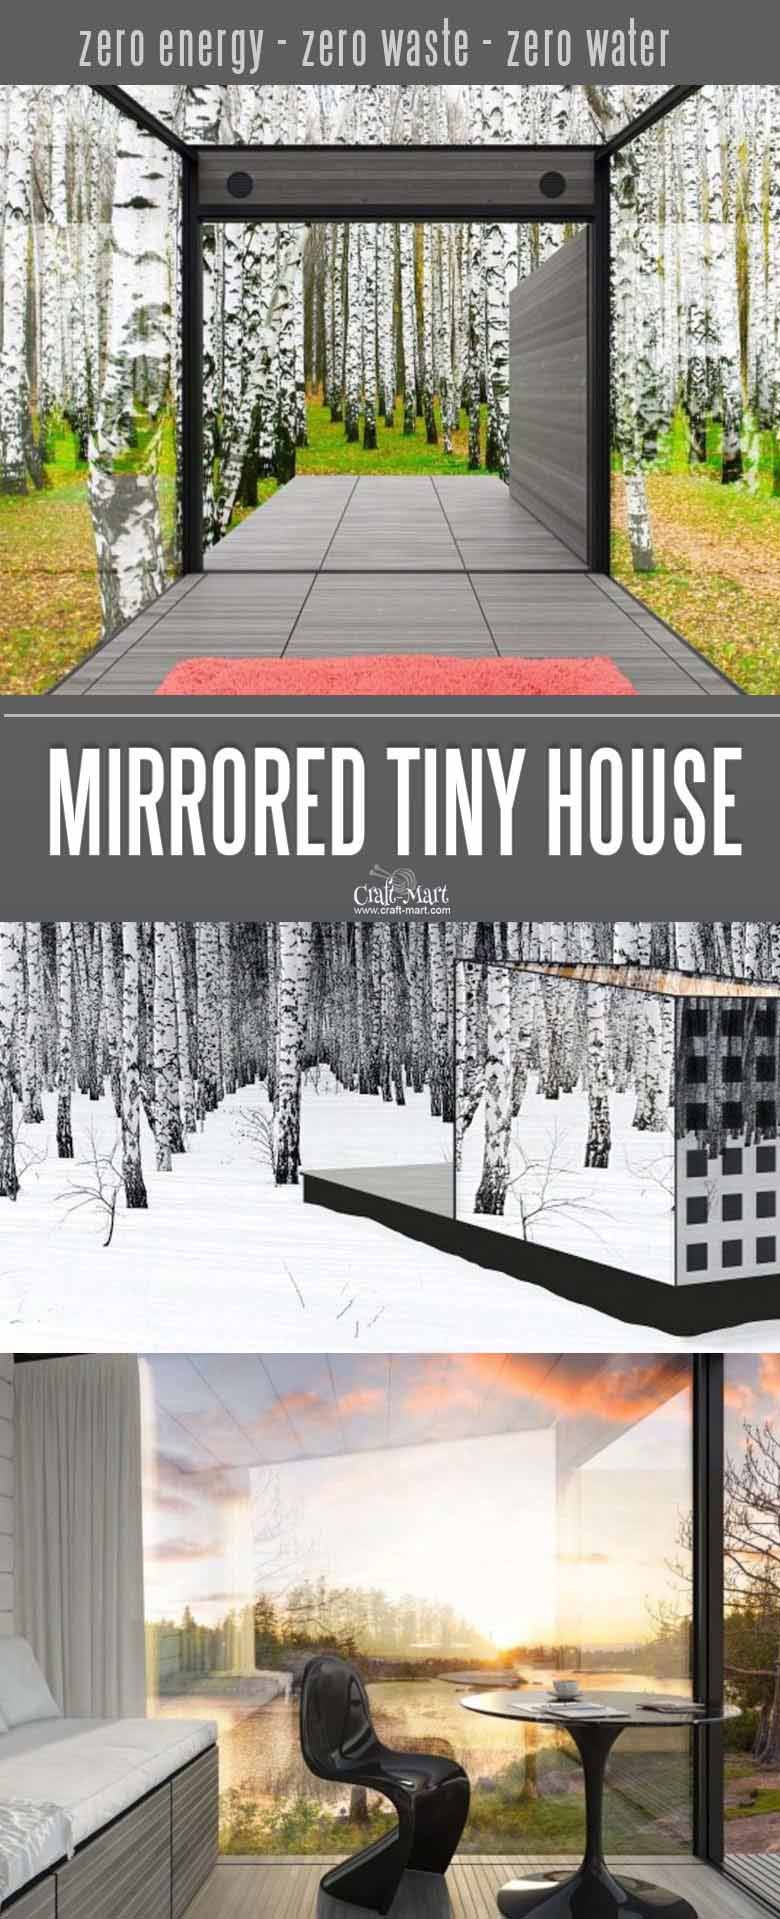 Mirrored tiny house that is self-sustainable. No need for heating or cooling. Look at these absolutely awesome tiny houses that you can afford! Some are 100% sustainable and do NOT need any utilities besides internet! You can add custom features from most of the tiny home builders. Keep dreaming on or take an action and get one of these little affordable homes!#tinyhouseplans #tinyhome #tinyhouses #diywoodcrafts #diyproject #realestate #smallhouseplans